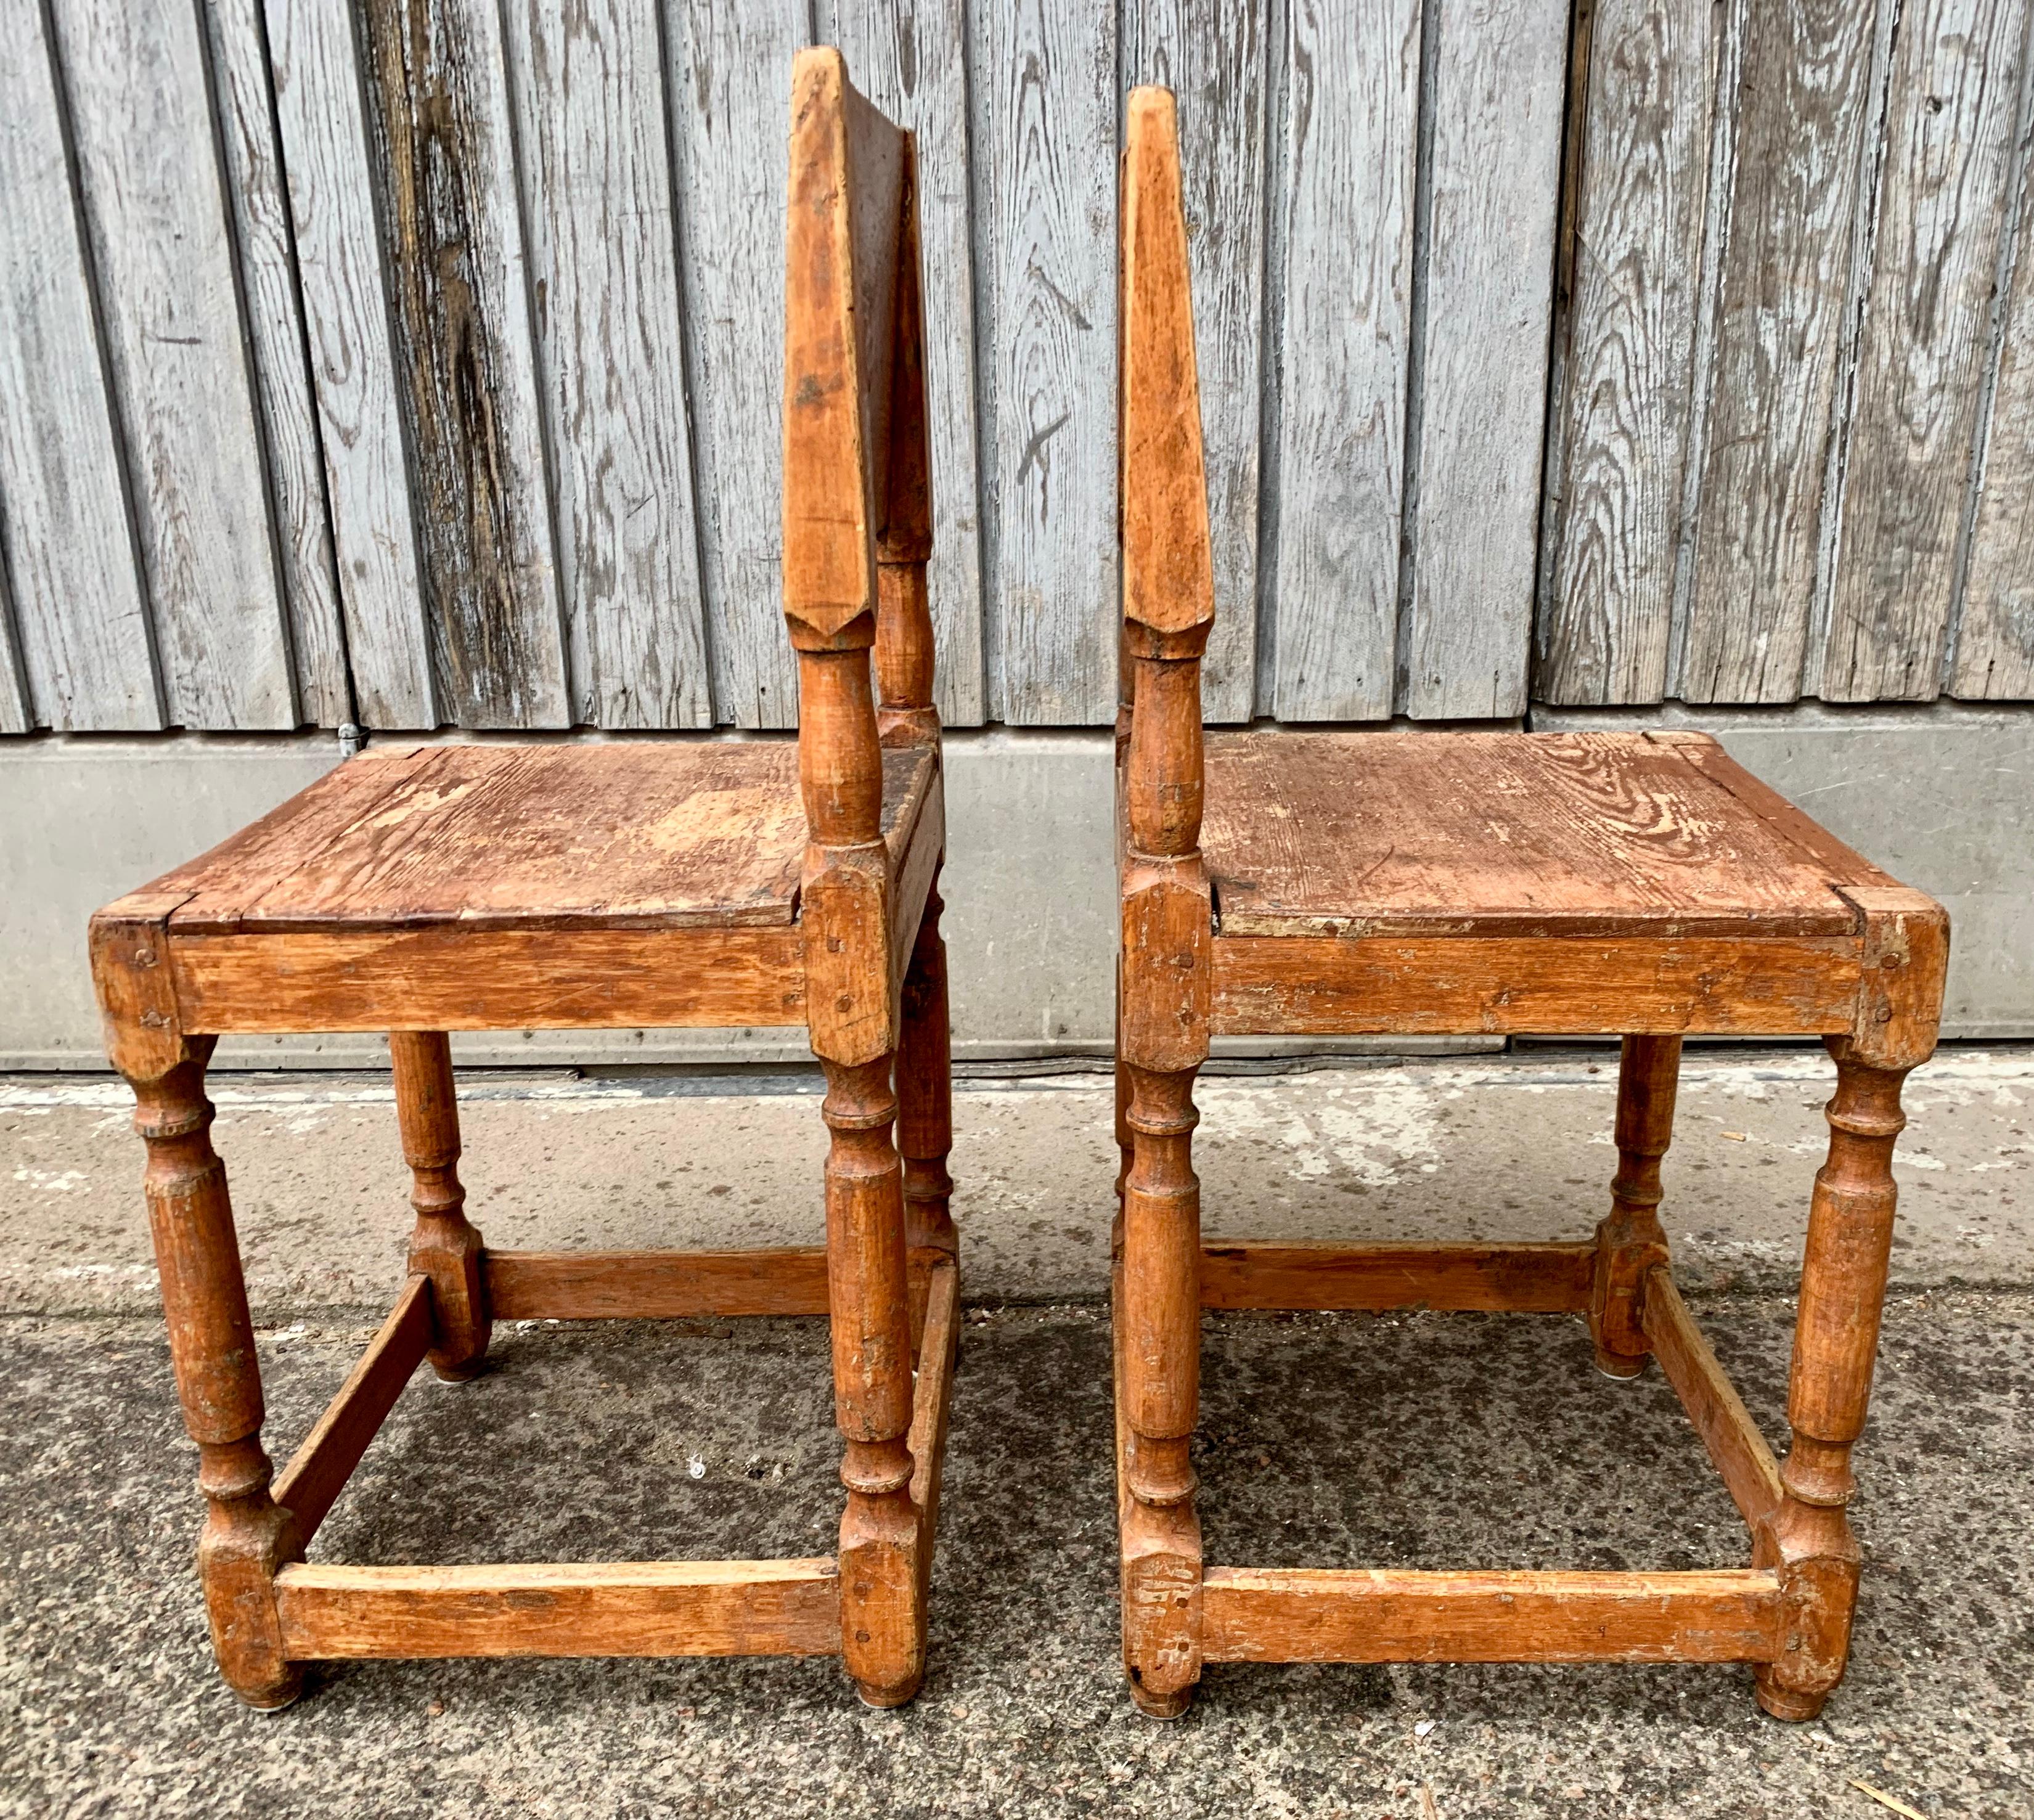 Hand-Crafted Early 19th Century Pair of Swedish Folk Art Chairs